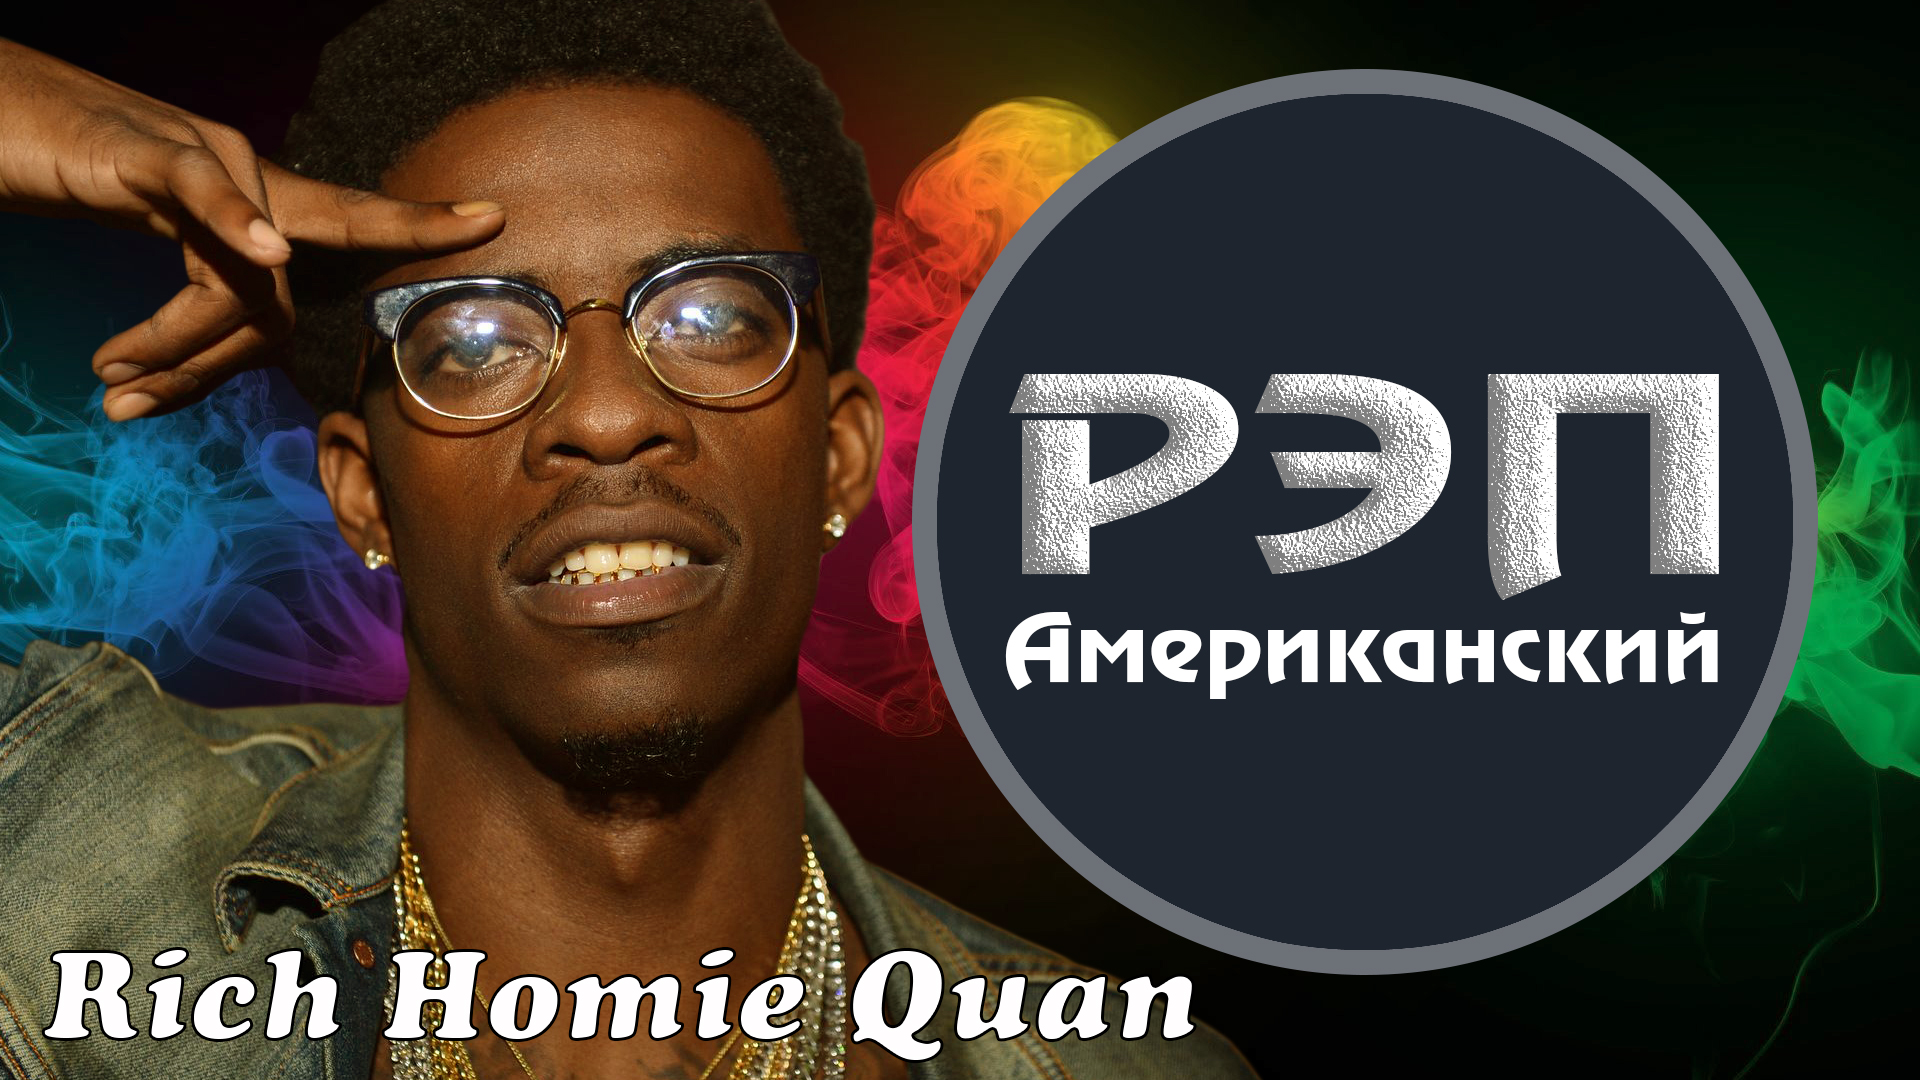 Rich homie quan to be worried